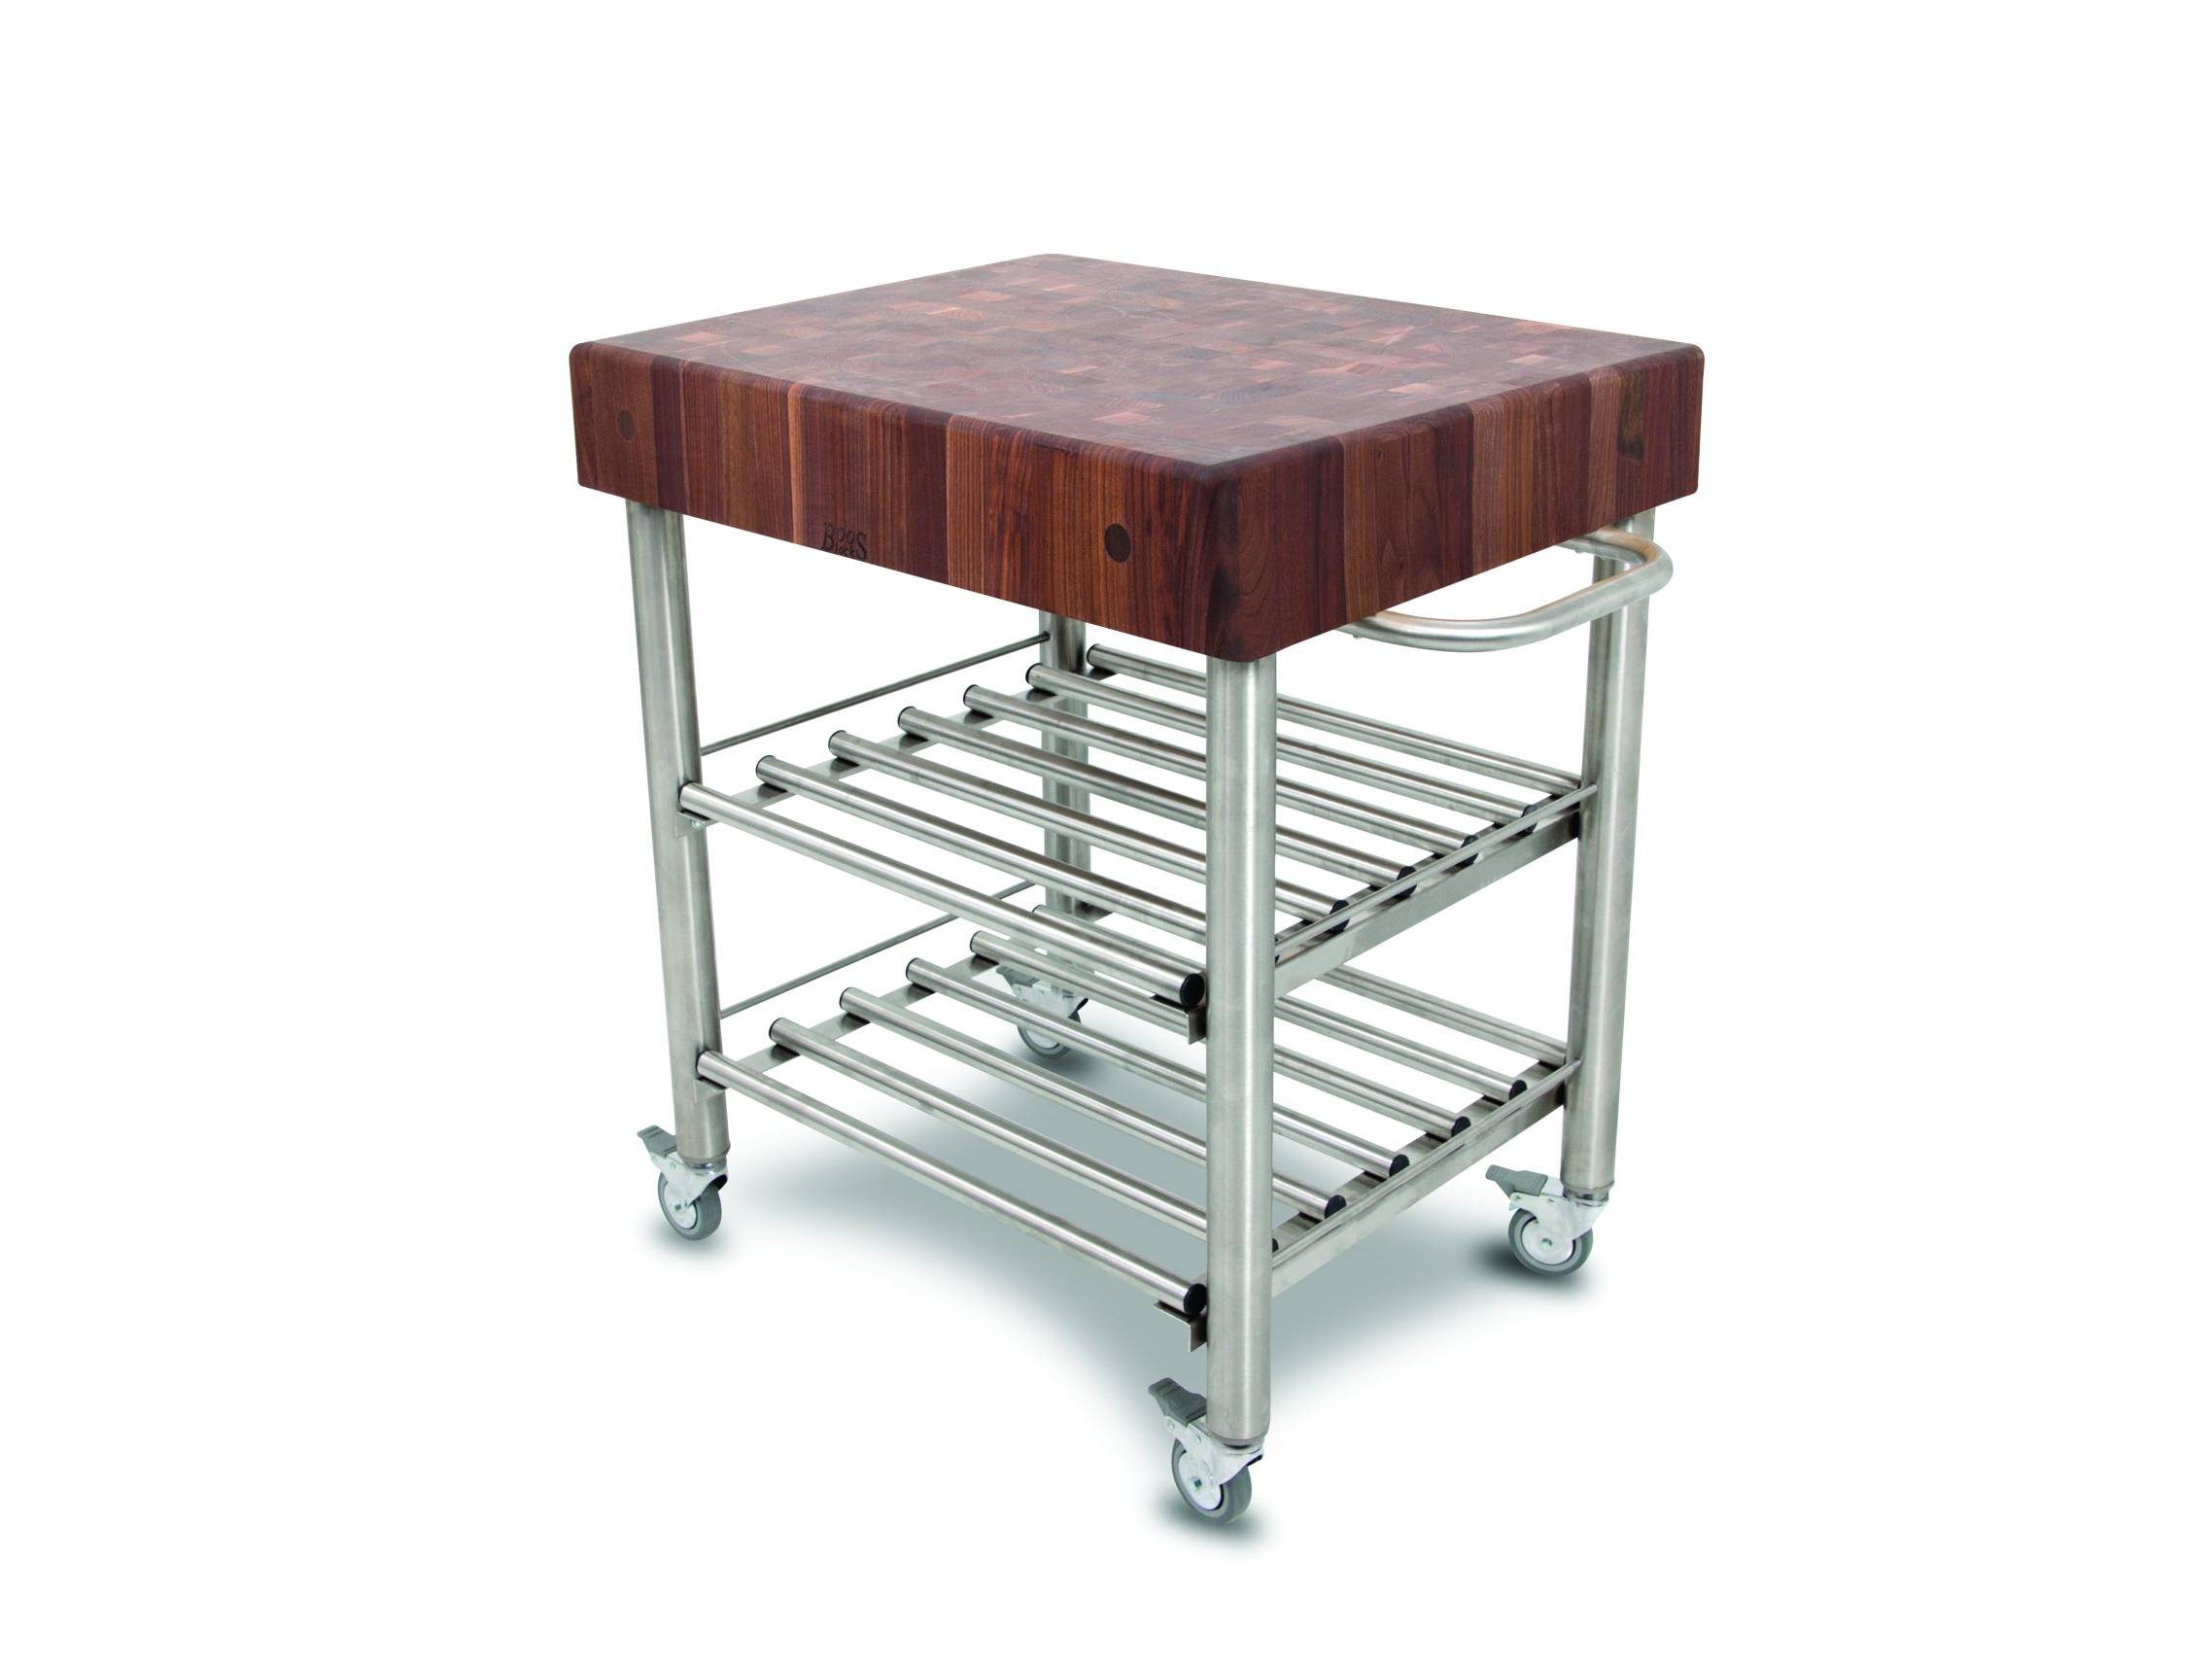 Cucina Kitchen &amp; Wine serving cart with Black Walnut end grain countertop and stainless steel base with 2 shelves, towel rack; lockable casters; 29